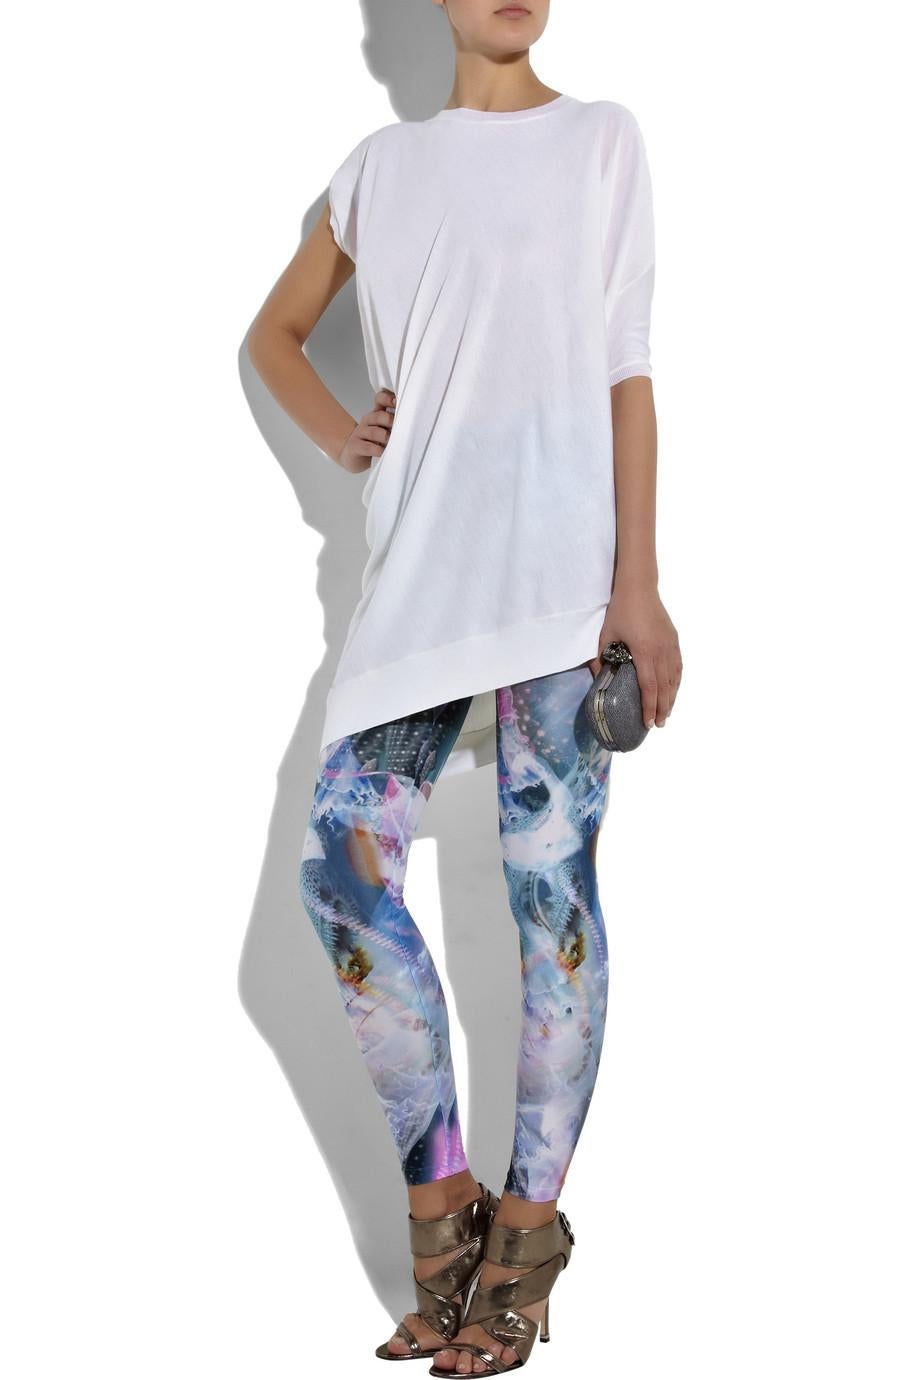 From Iconic Atlantis Plato collection

Multicolored satin-jersey leggings with an abstract digital jellyfish print. 

Alexander McQueen leggings have an elasticated waist and simply slip on.
 78% nylon, 22% elastane. Dry clean. Designer color: